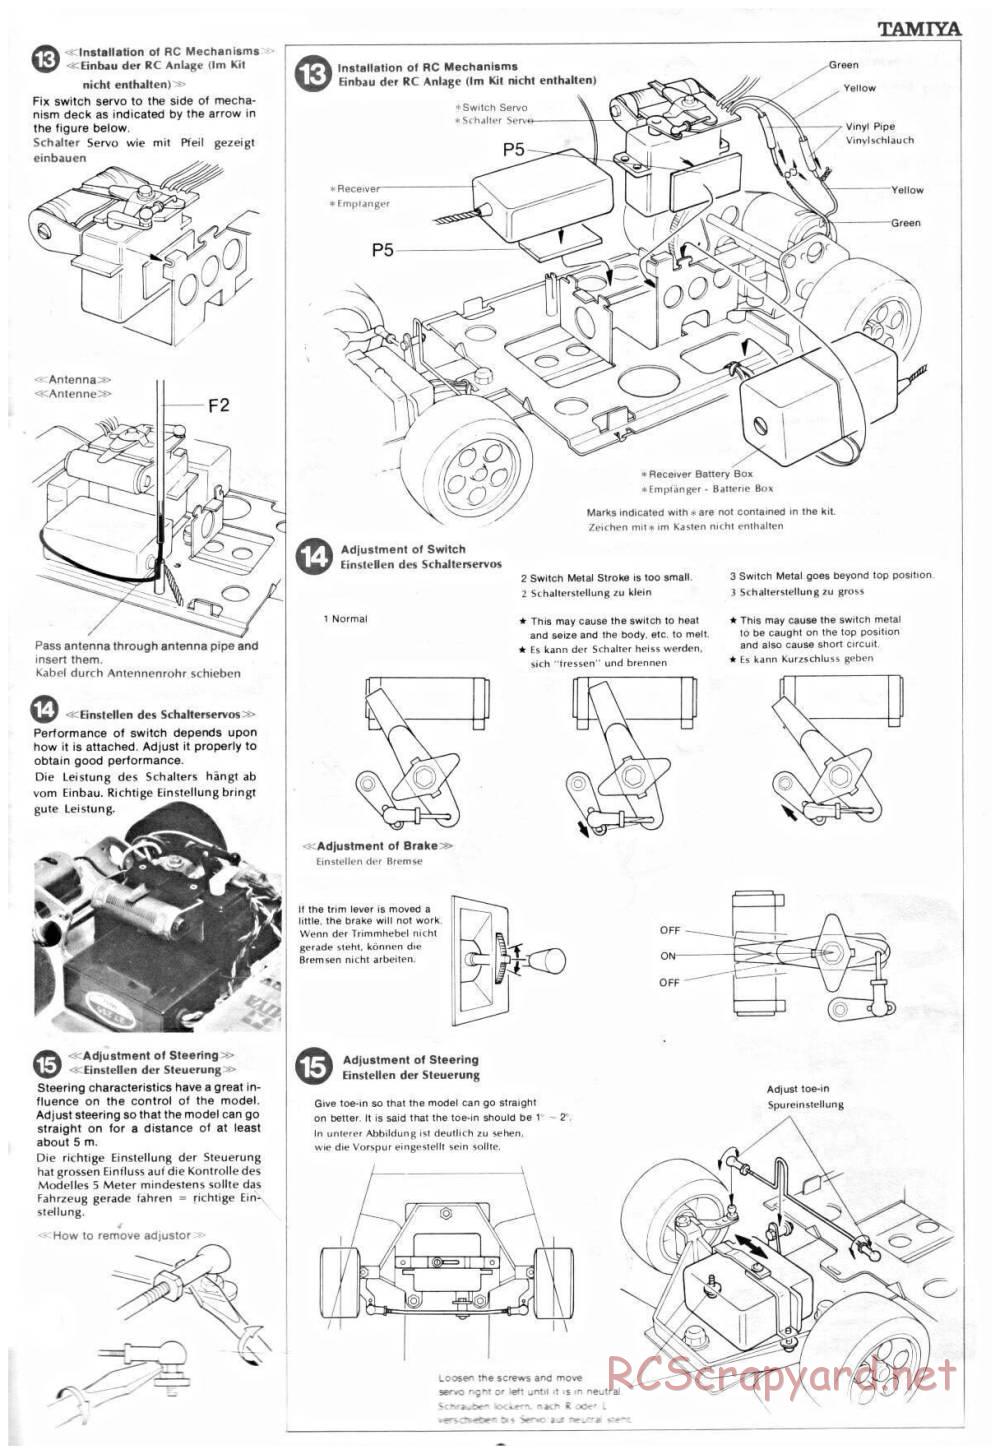 Tamiya - Lmbrghni Countach LP500S - 58005 - Manual - Page 9